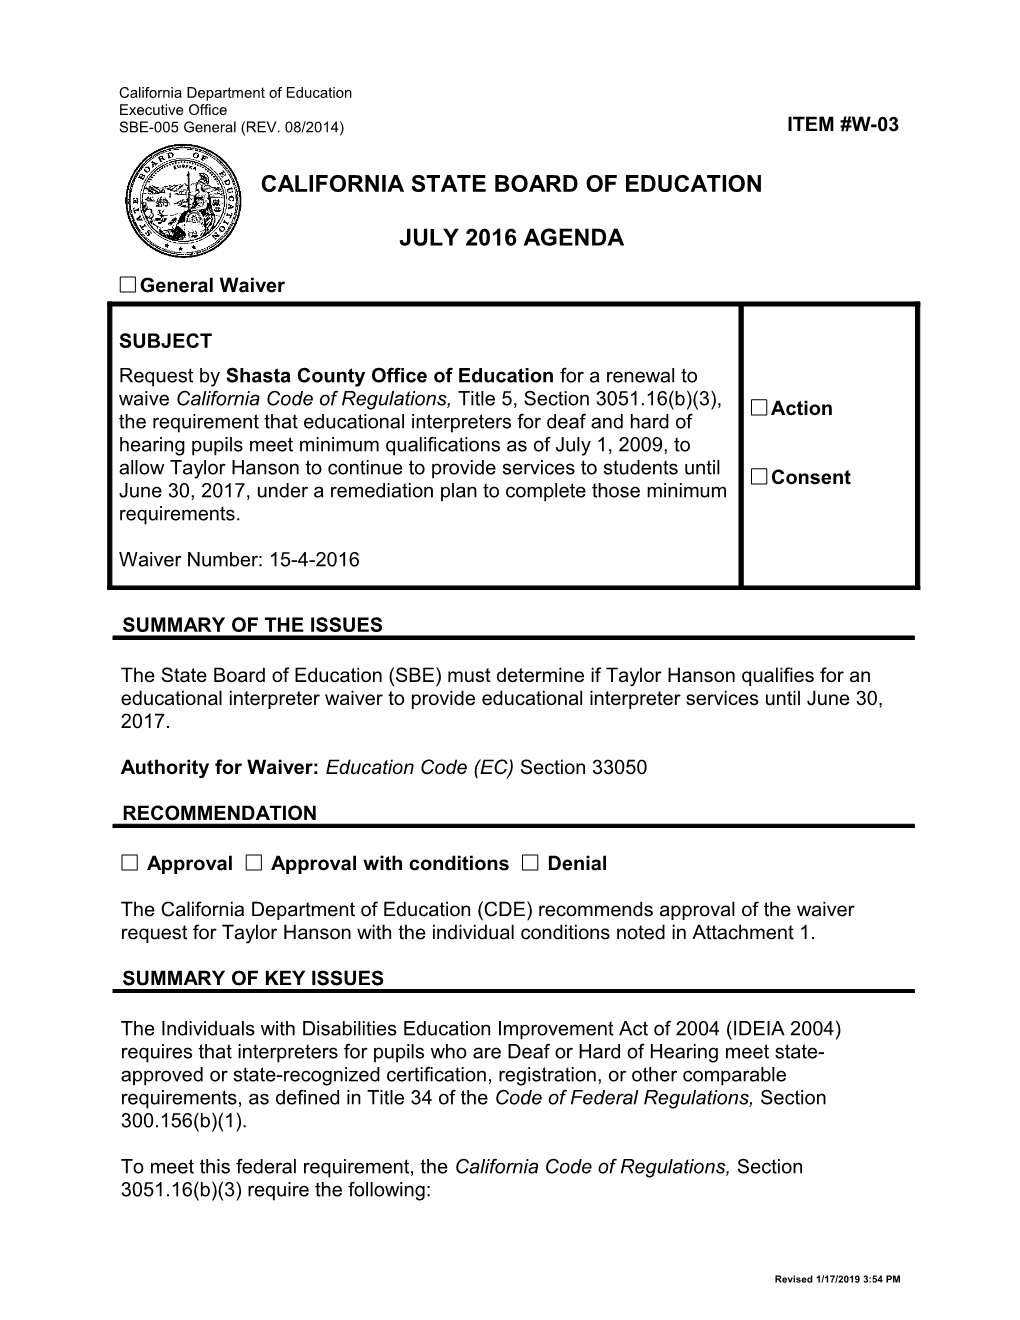 July 2016 Waiver Item W-03 - Meeting Agendas (CA State Board of Education)